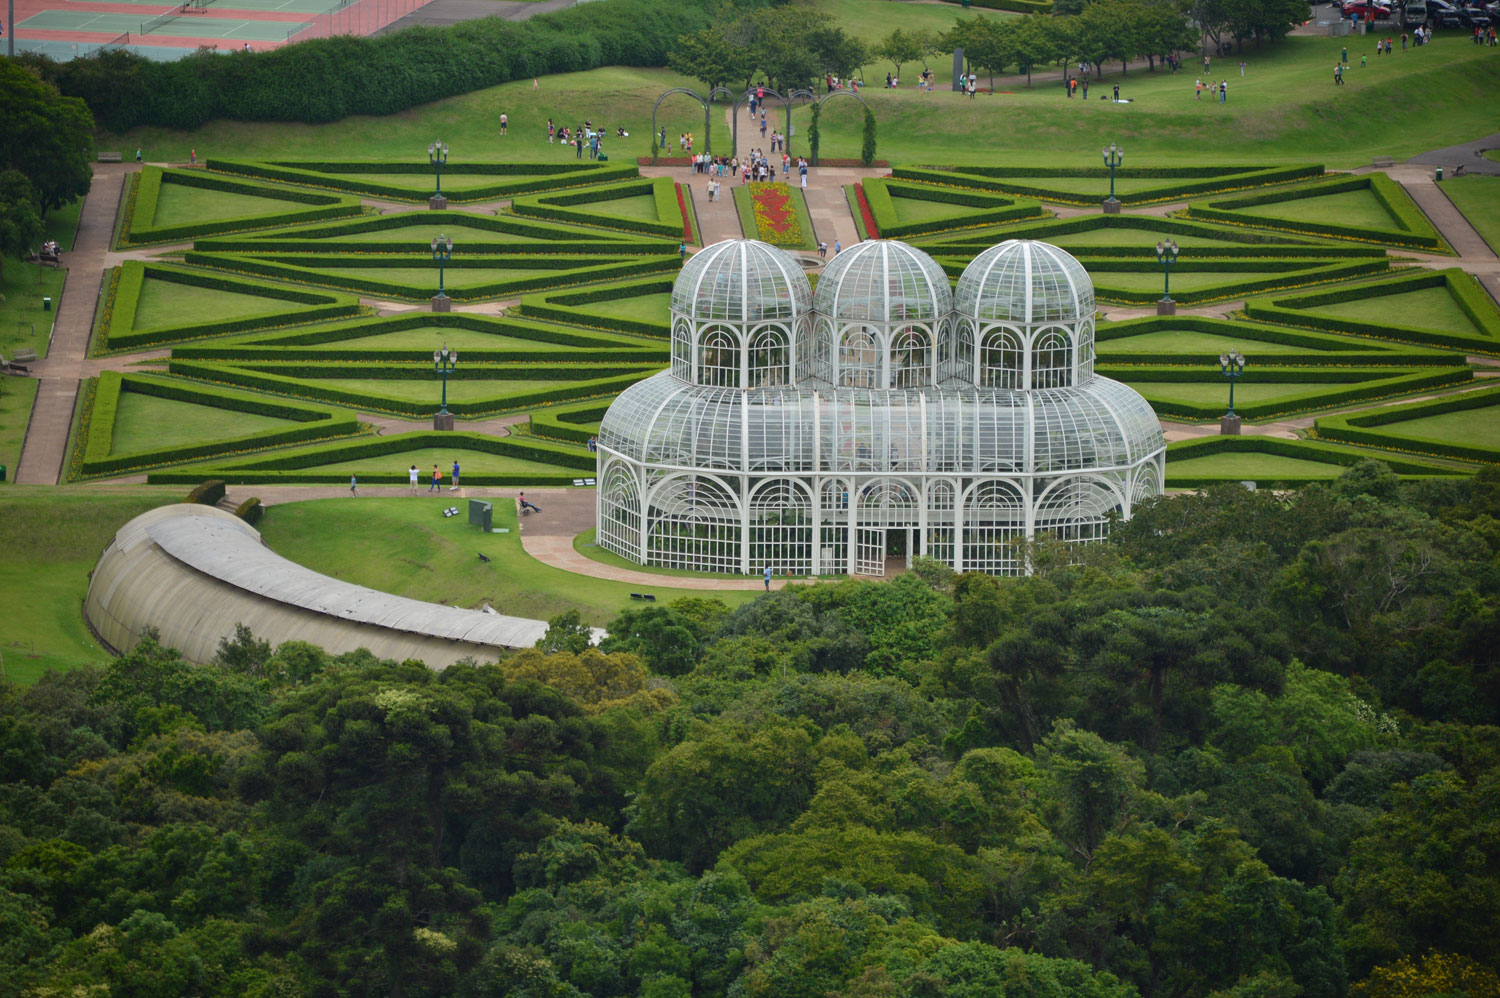 The Botanical Gardens in the city of Curitiba was created in the style of French gardens, with fountains, lakes and an art nouveau style greenhouse, which lights up at night.